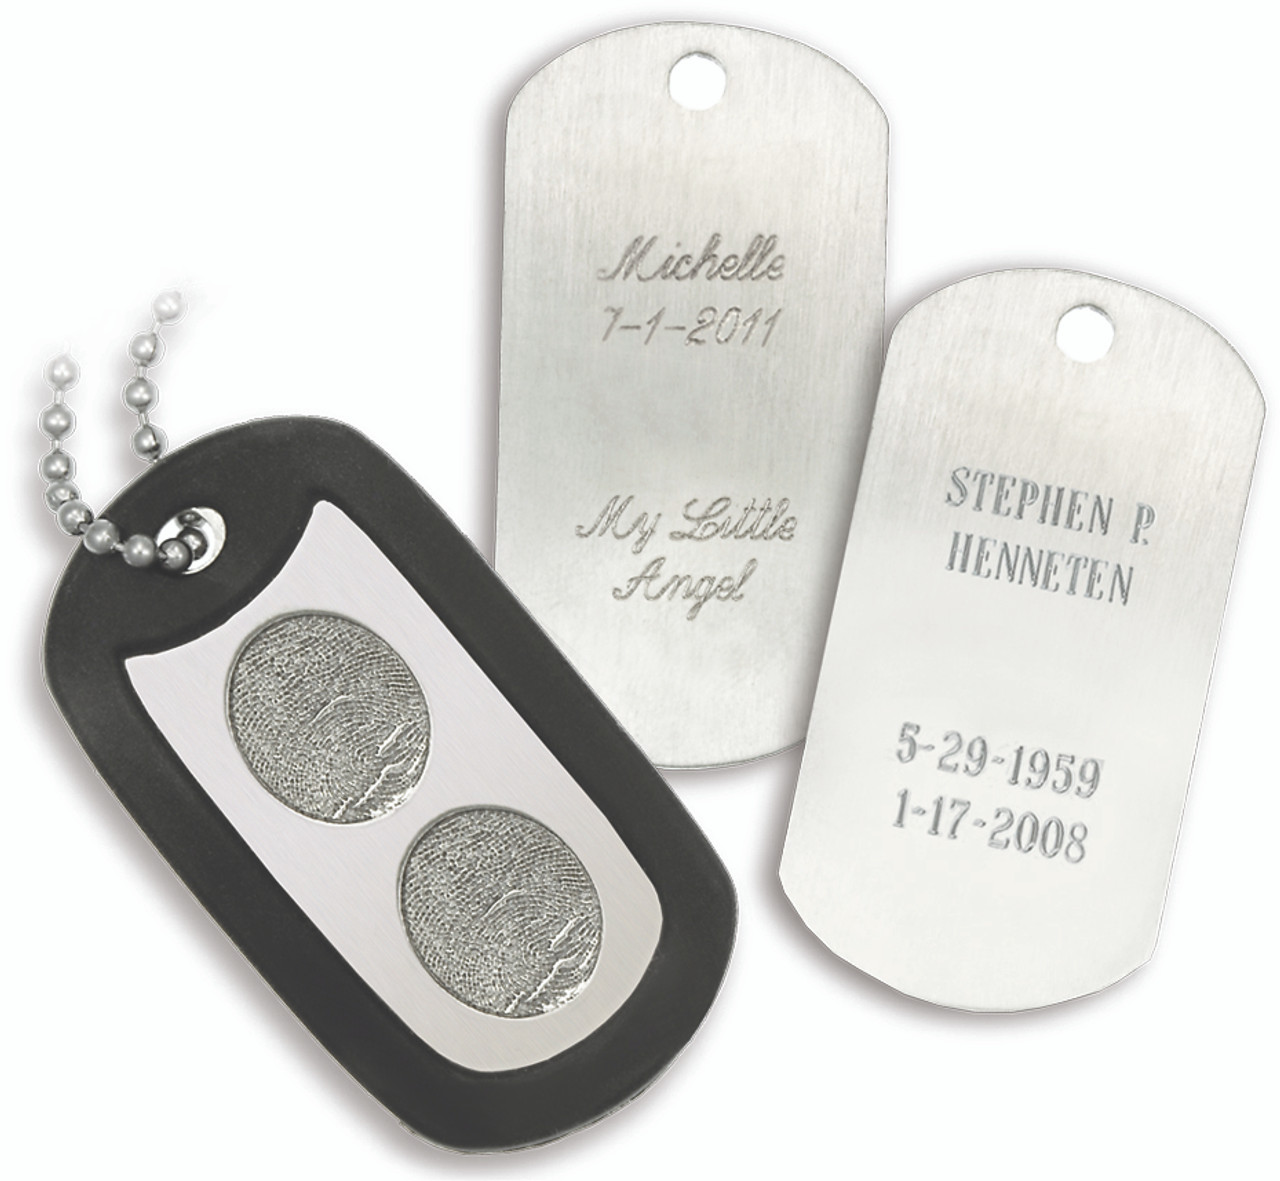 KeyTags with back engravings